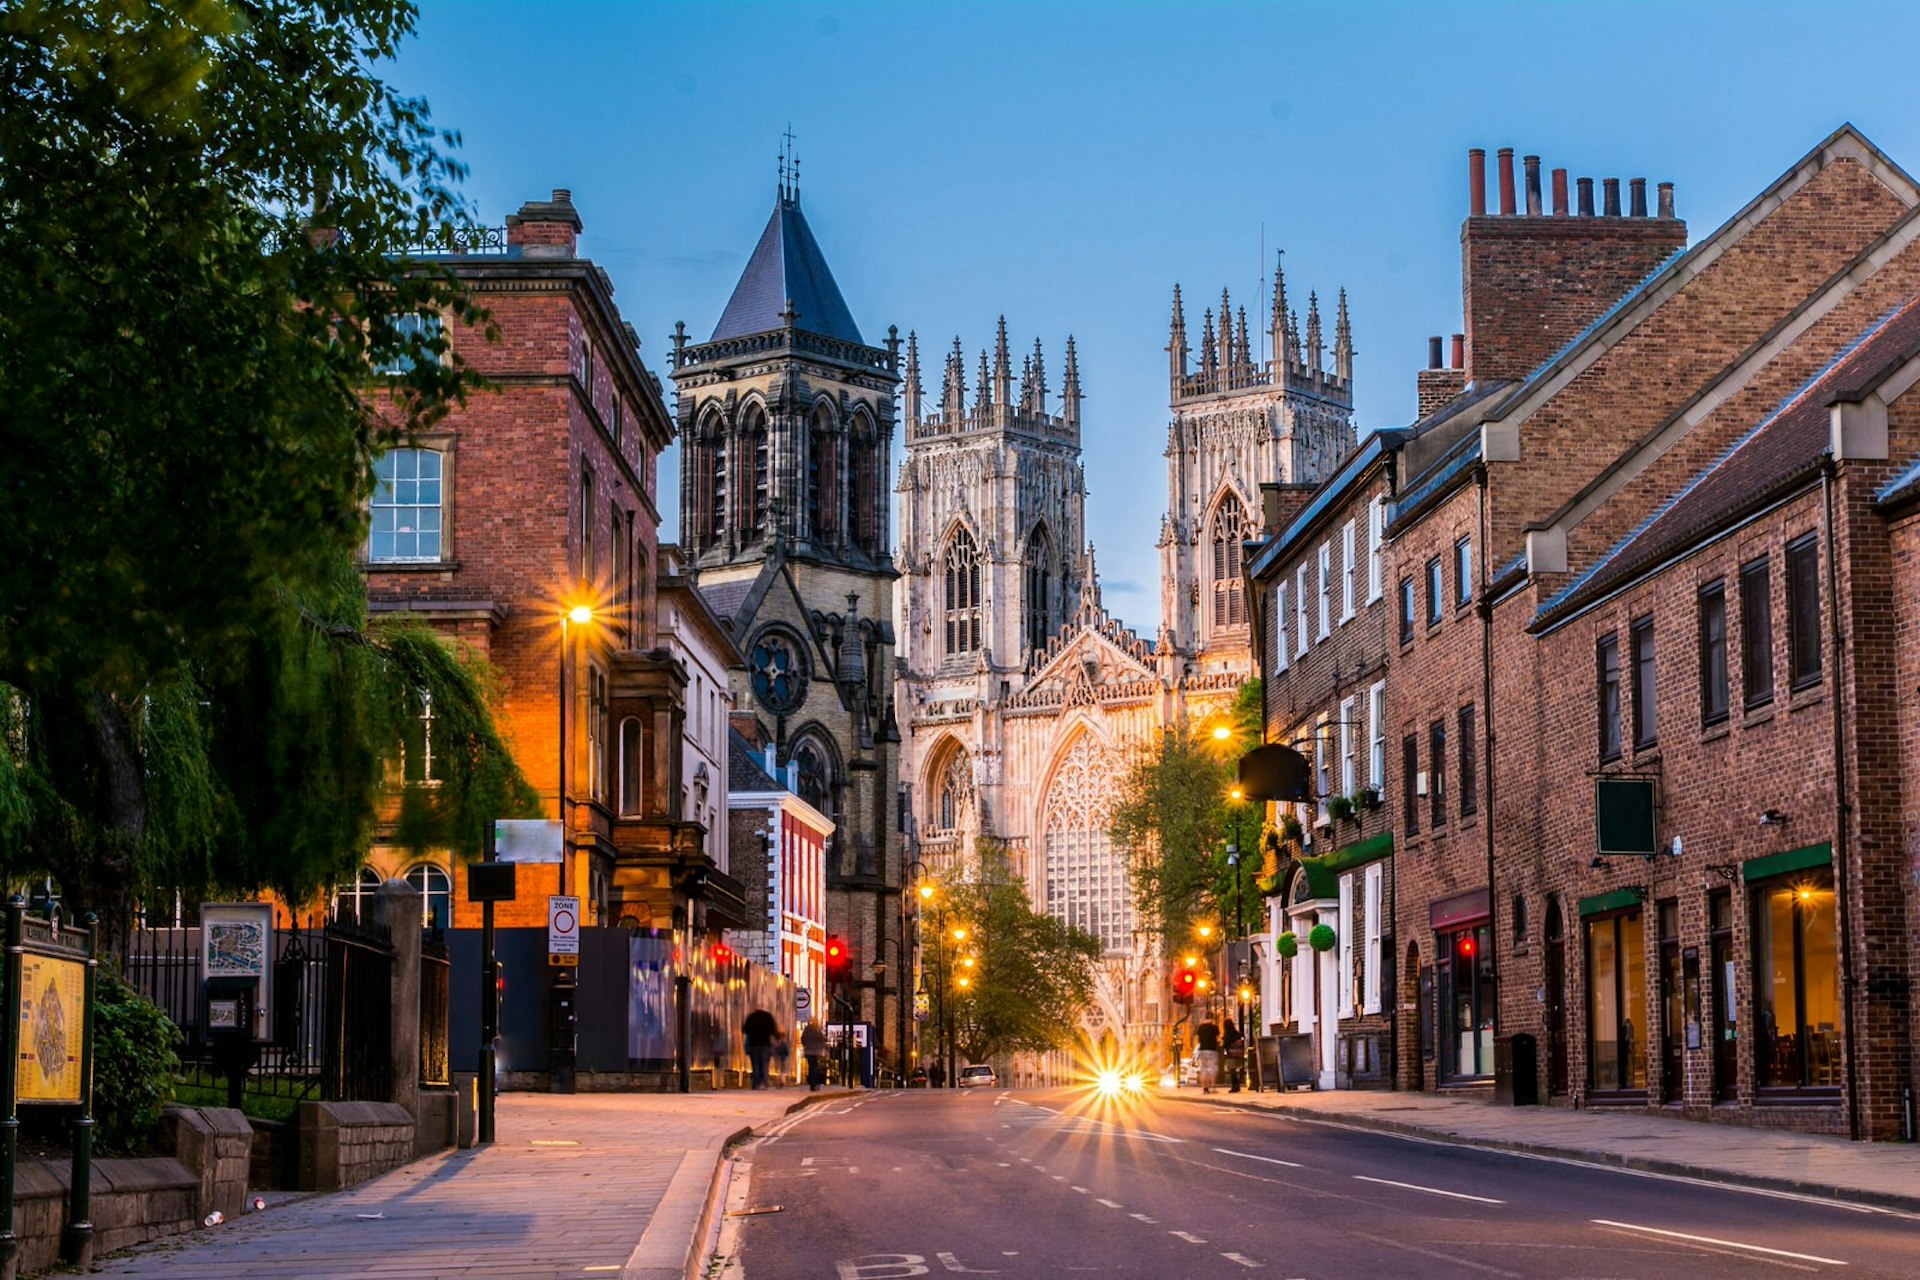 An evening cityscape shot of York, with York Minster in the background and more modern redbrick buildings in the foreground.